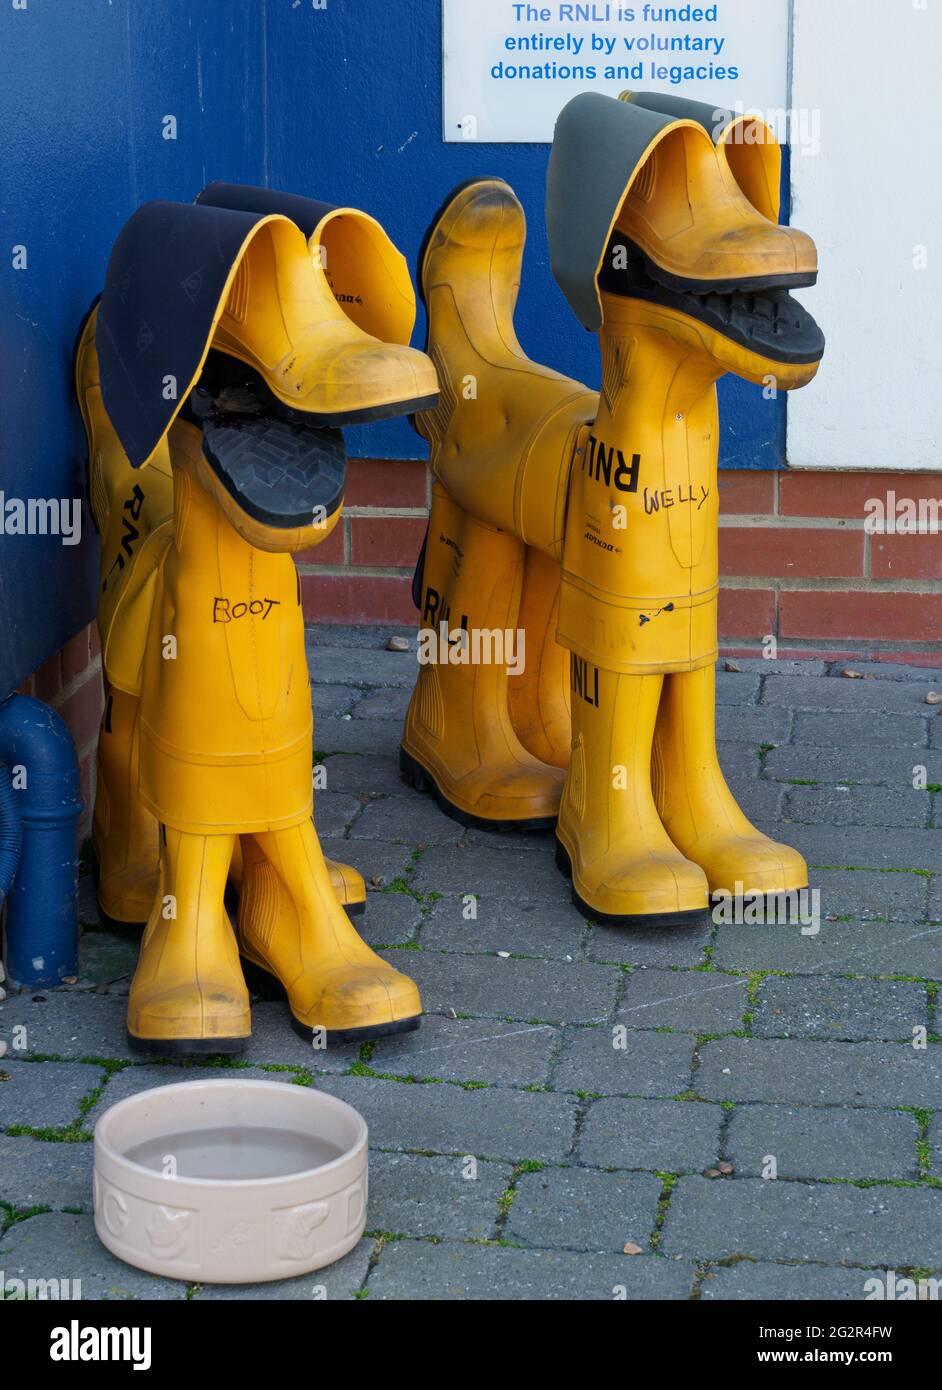 RNLI wellington boots formed into the shape of 2 dogs, at the RNLI boathouse, Hastings, East Sussex, U.K. Stock Photo